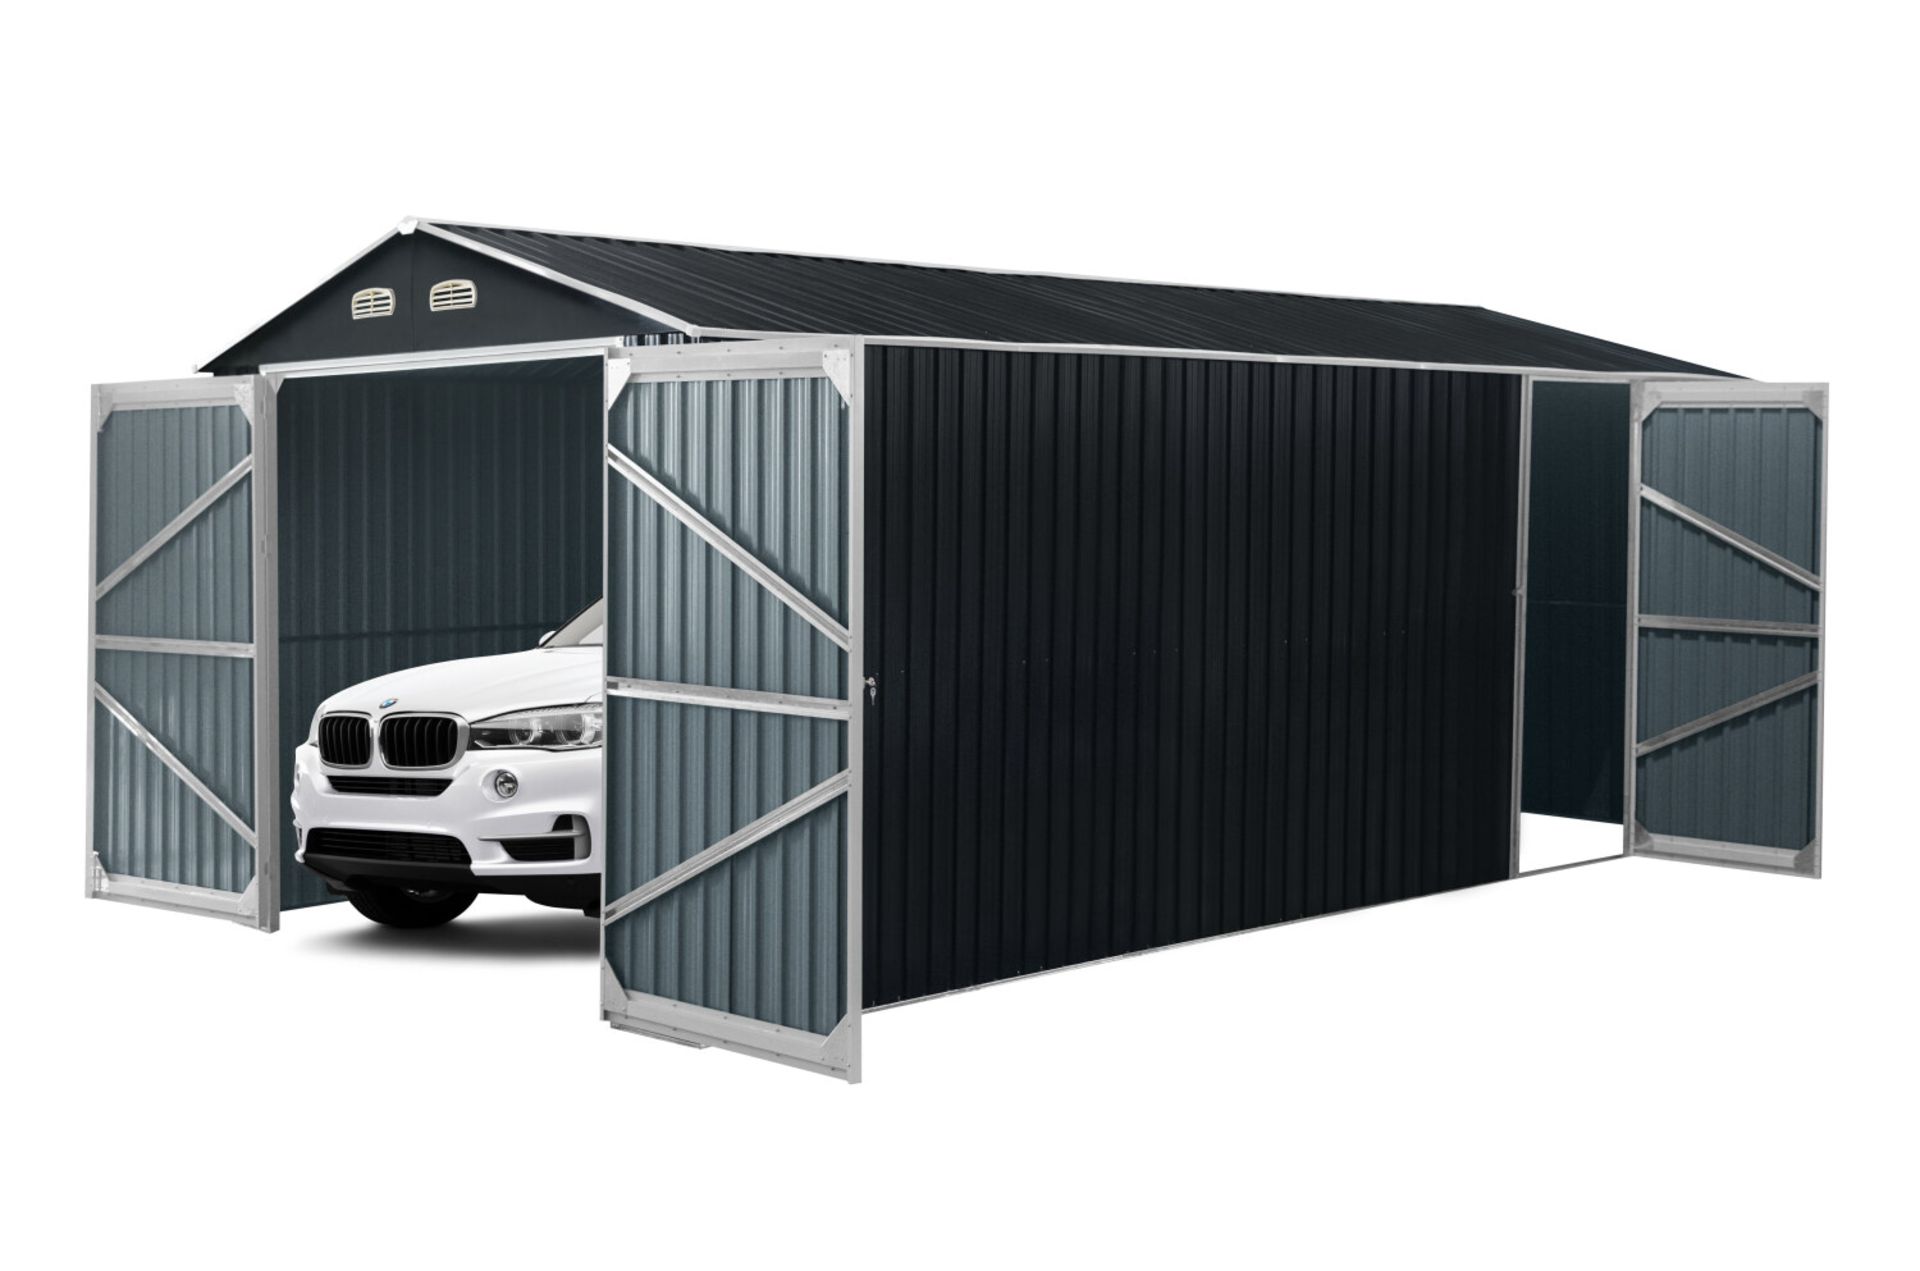 TMG-MS1020A TMG INDUSTRIAL 10' X 20' METAL GARAGE SHED WITH DOUBLE FRONT DOORS, 7'8'' PEAK HEIGHT,